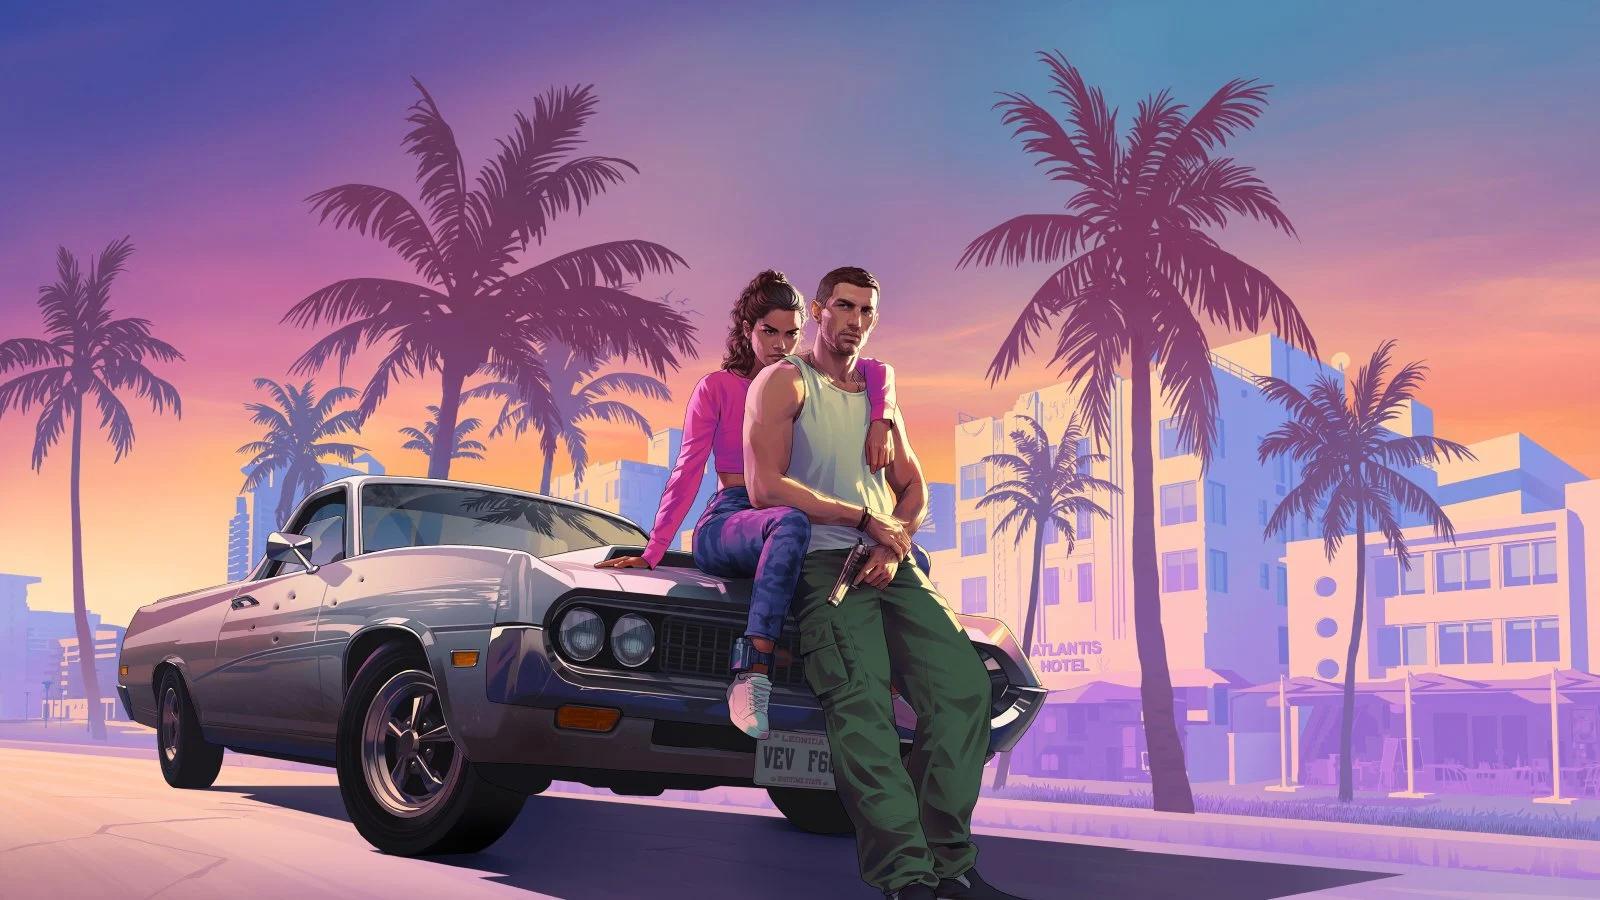 Grand Theft Auto 6 release date delayed for the first time